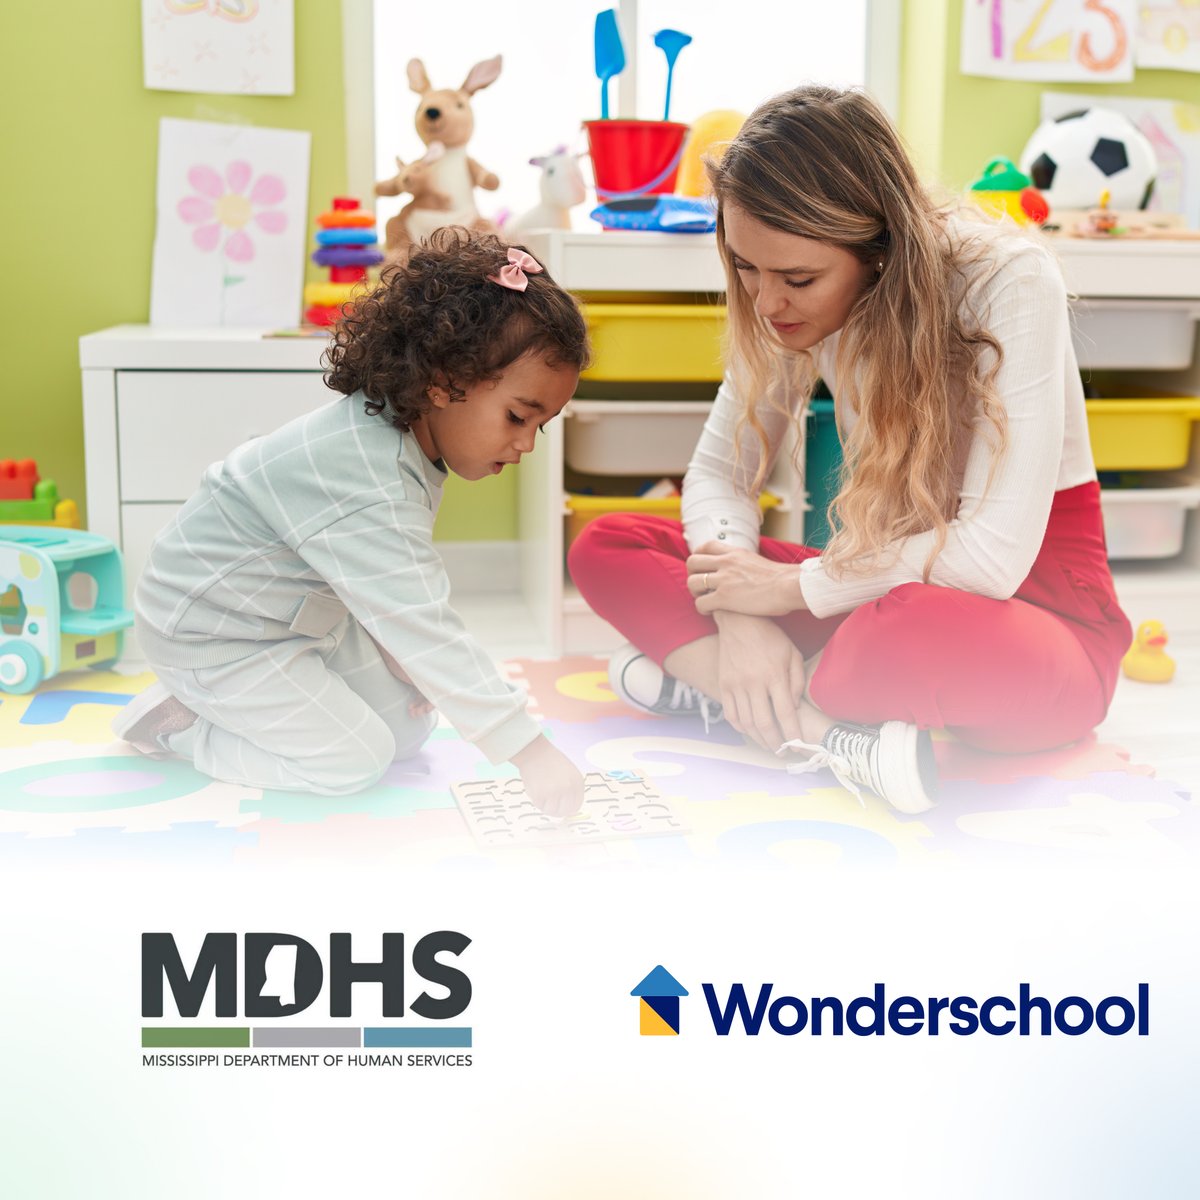 Exciting news! We've partnered with @wonderschools, a leading childcare management platform, to address MS childcare needs! Our focus recruiting and empowering educators, supporting providers, and creating sustainable childcare options statewide.Learn more:ow.ly/RoTN50PYhr3